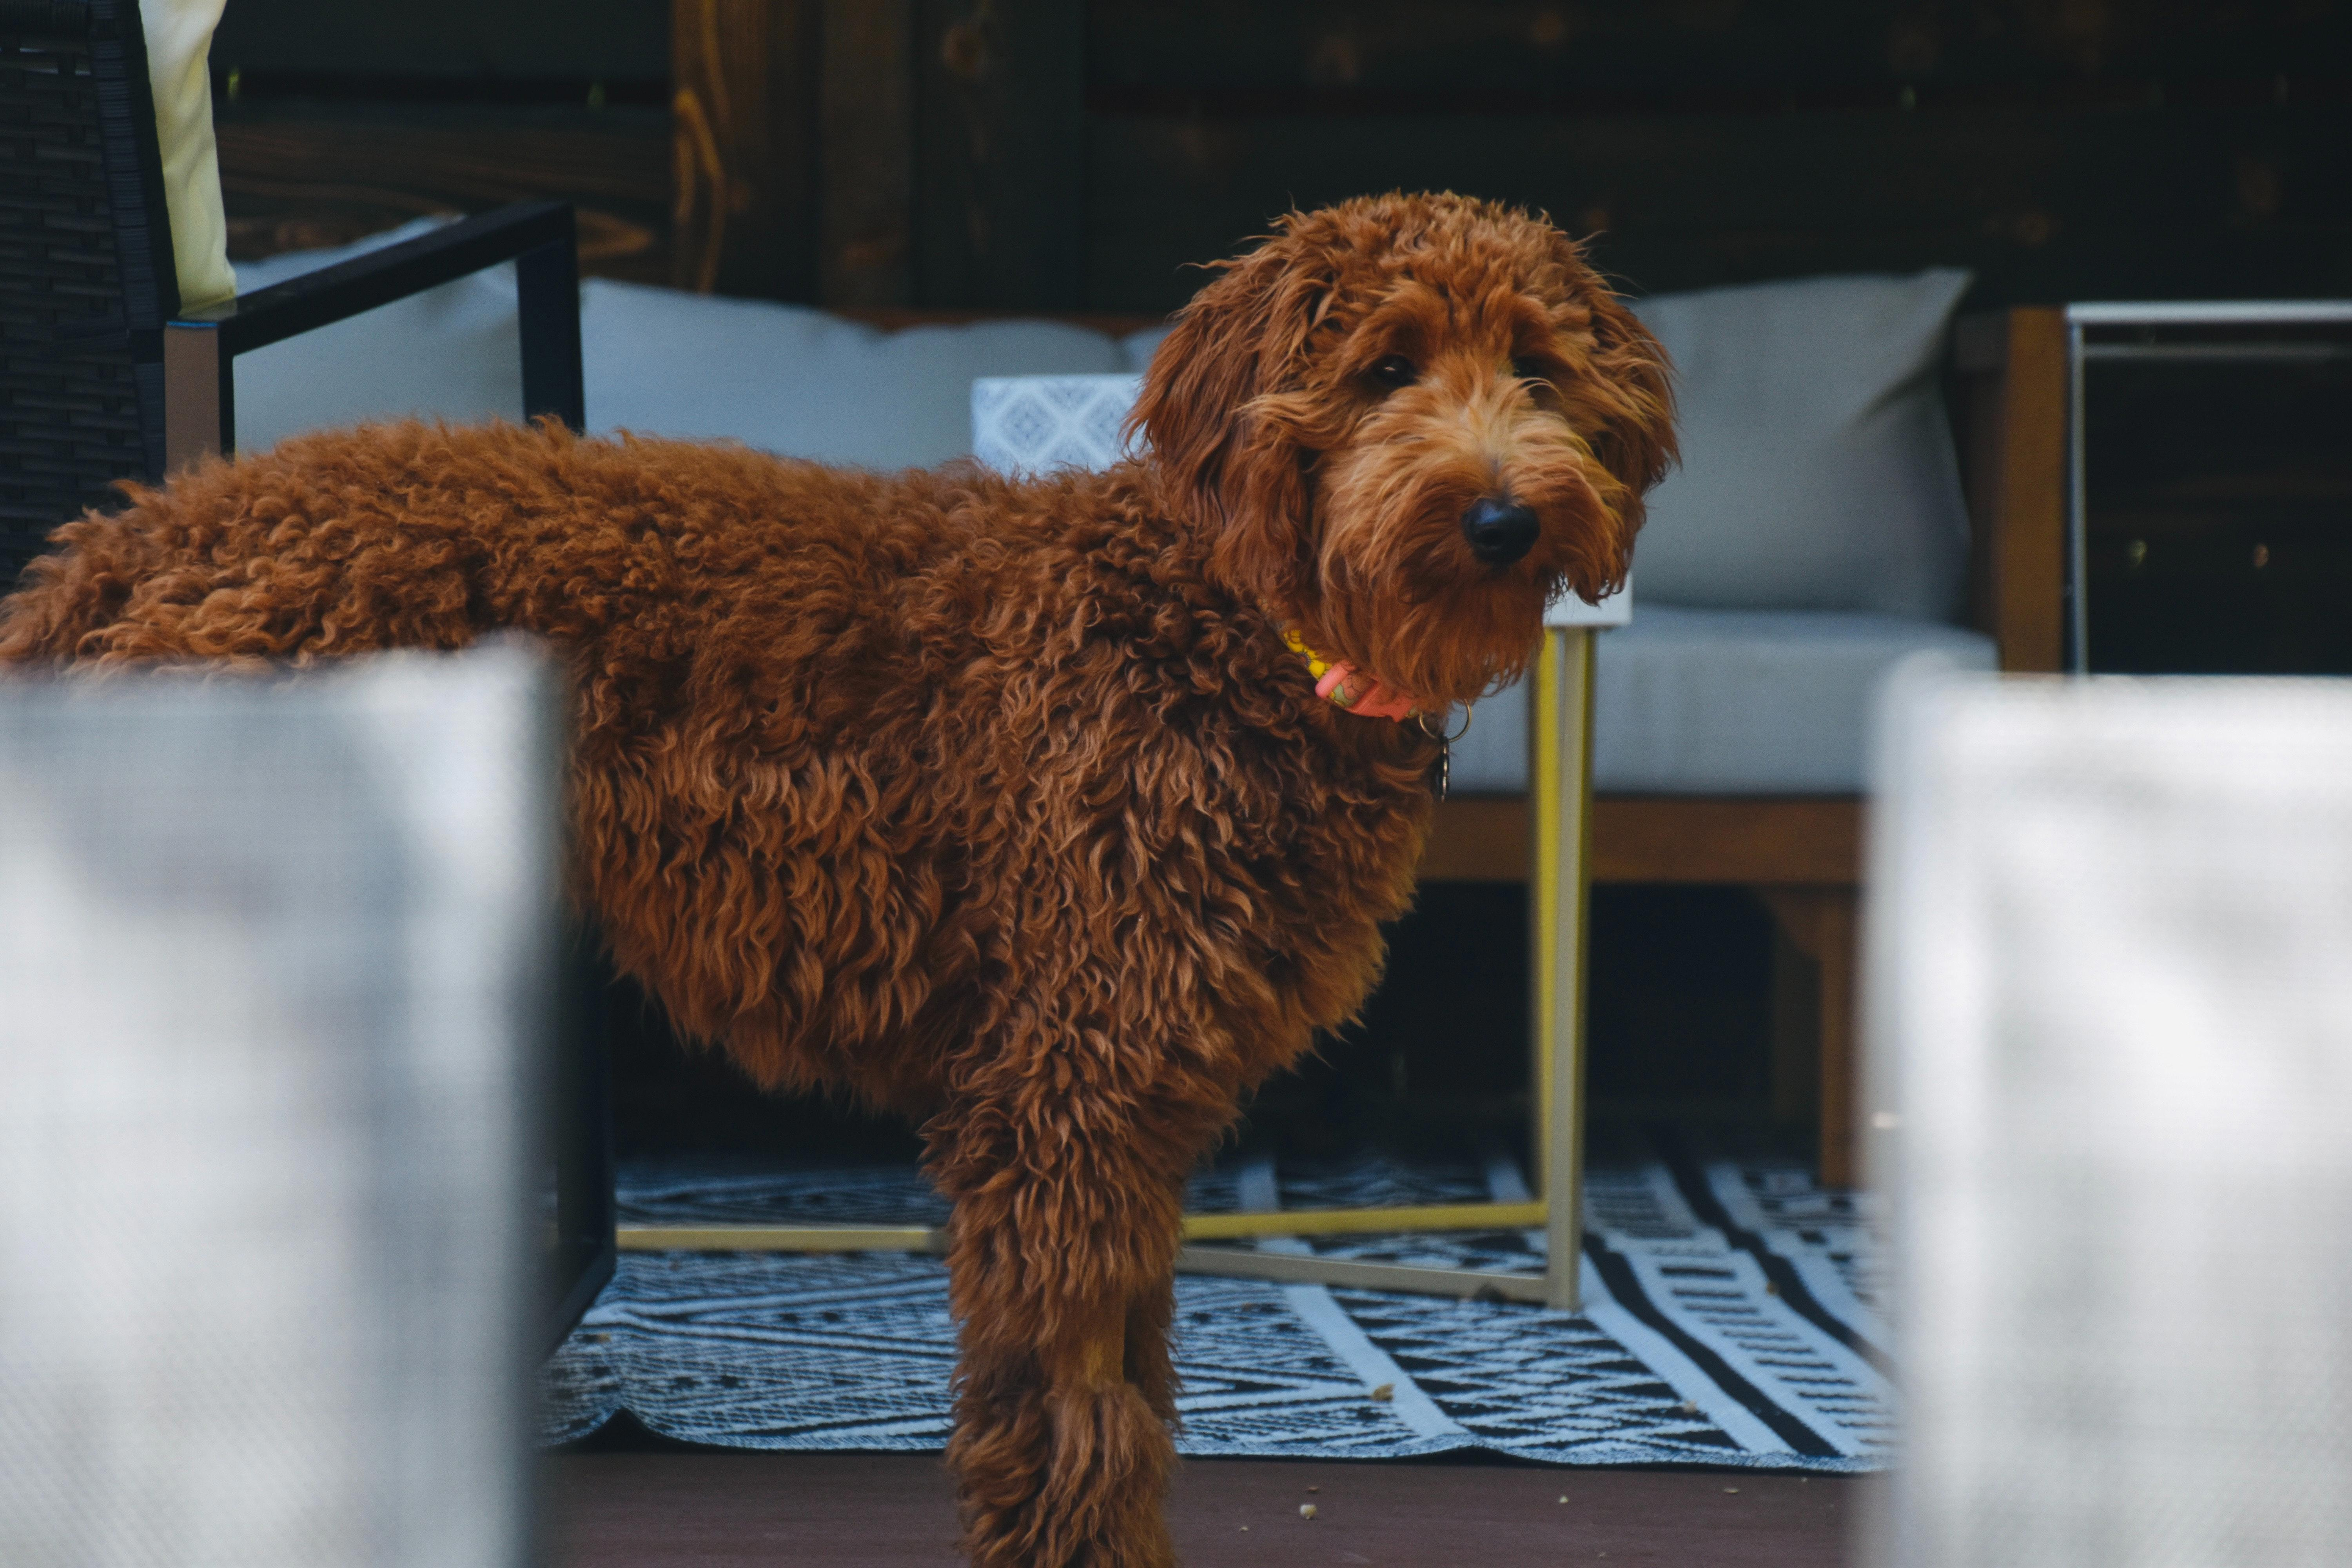 "Finding the Perfect Food for Your Goldendoodle: A Guide to the Best Dog Food for Goldendoodles"